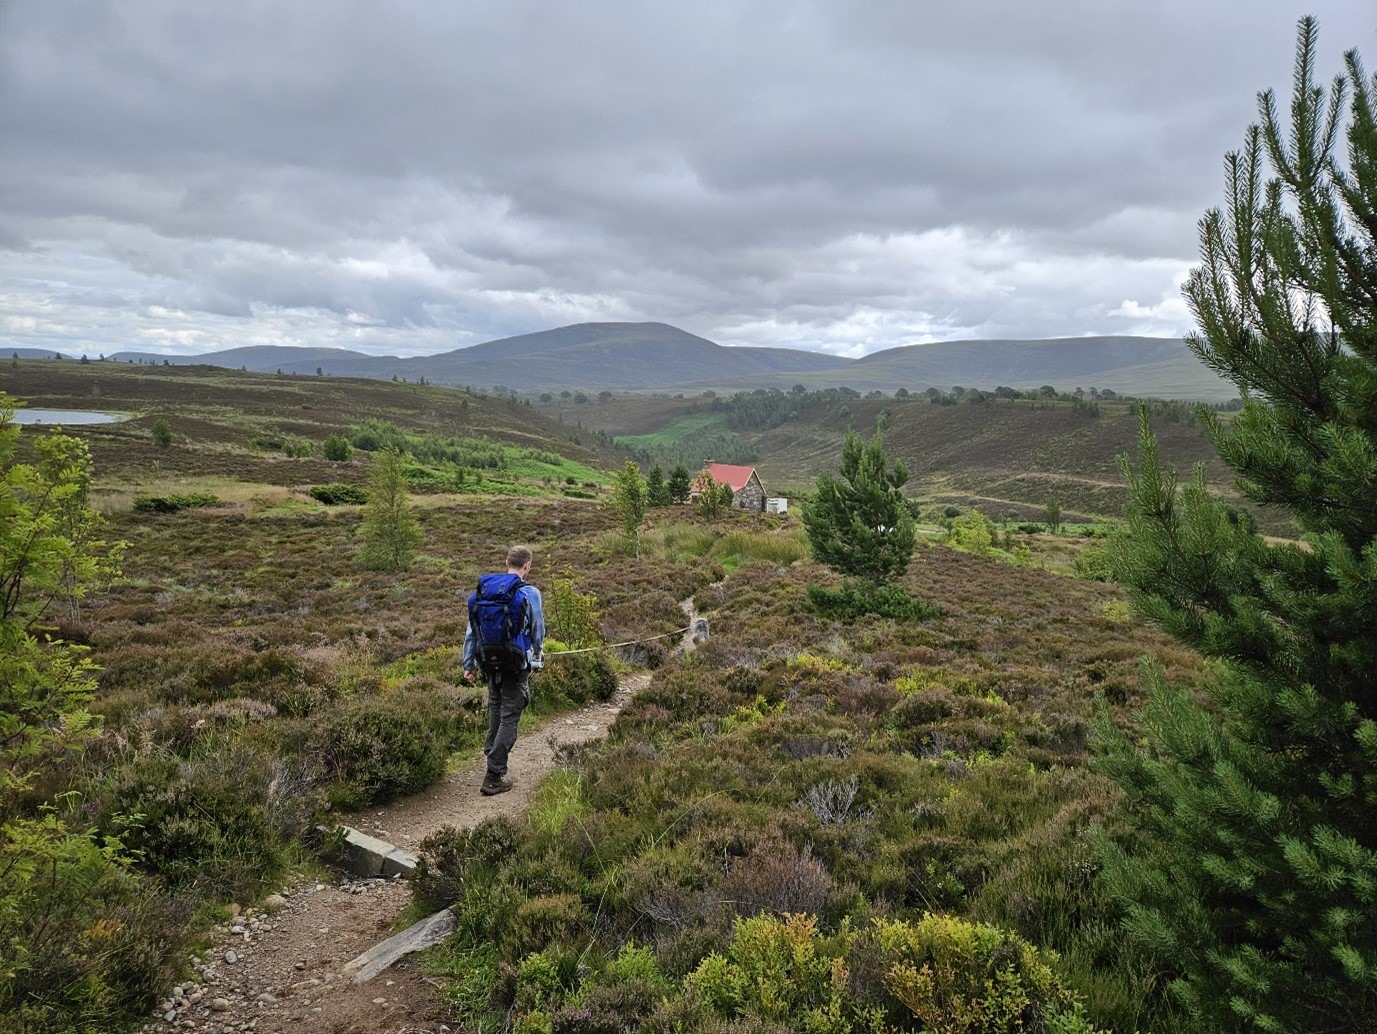 RSPB Scotland's Ben Oliver Jones is walking his dog along a trail surrounded by heather, conifer trees and other plants. They are heading towards a red-roofed building and there are hills in the distance.